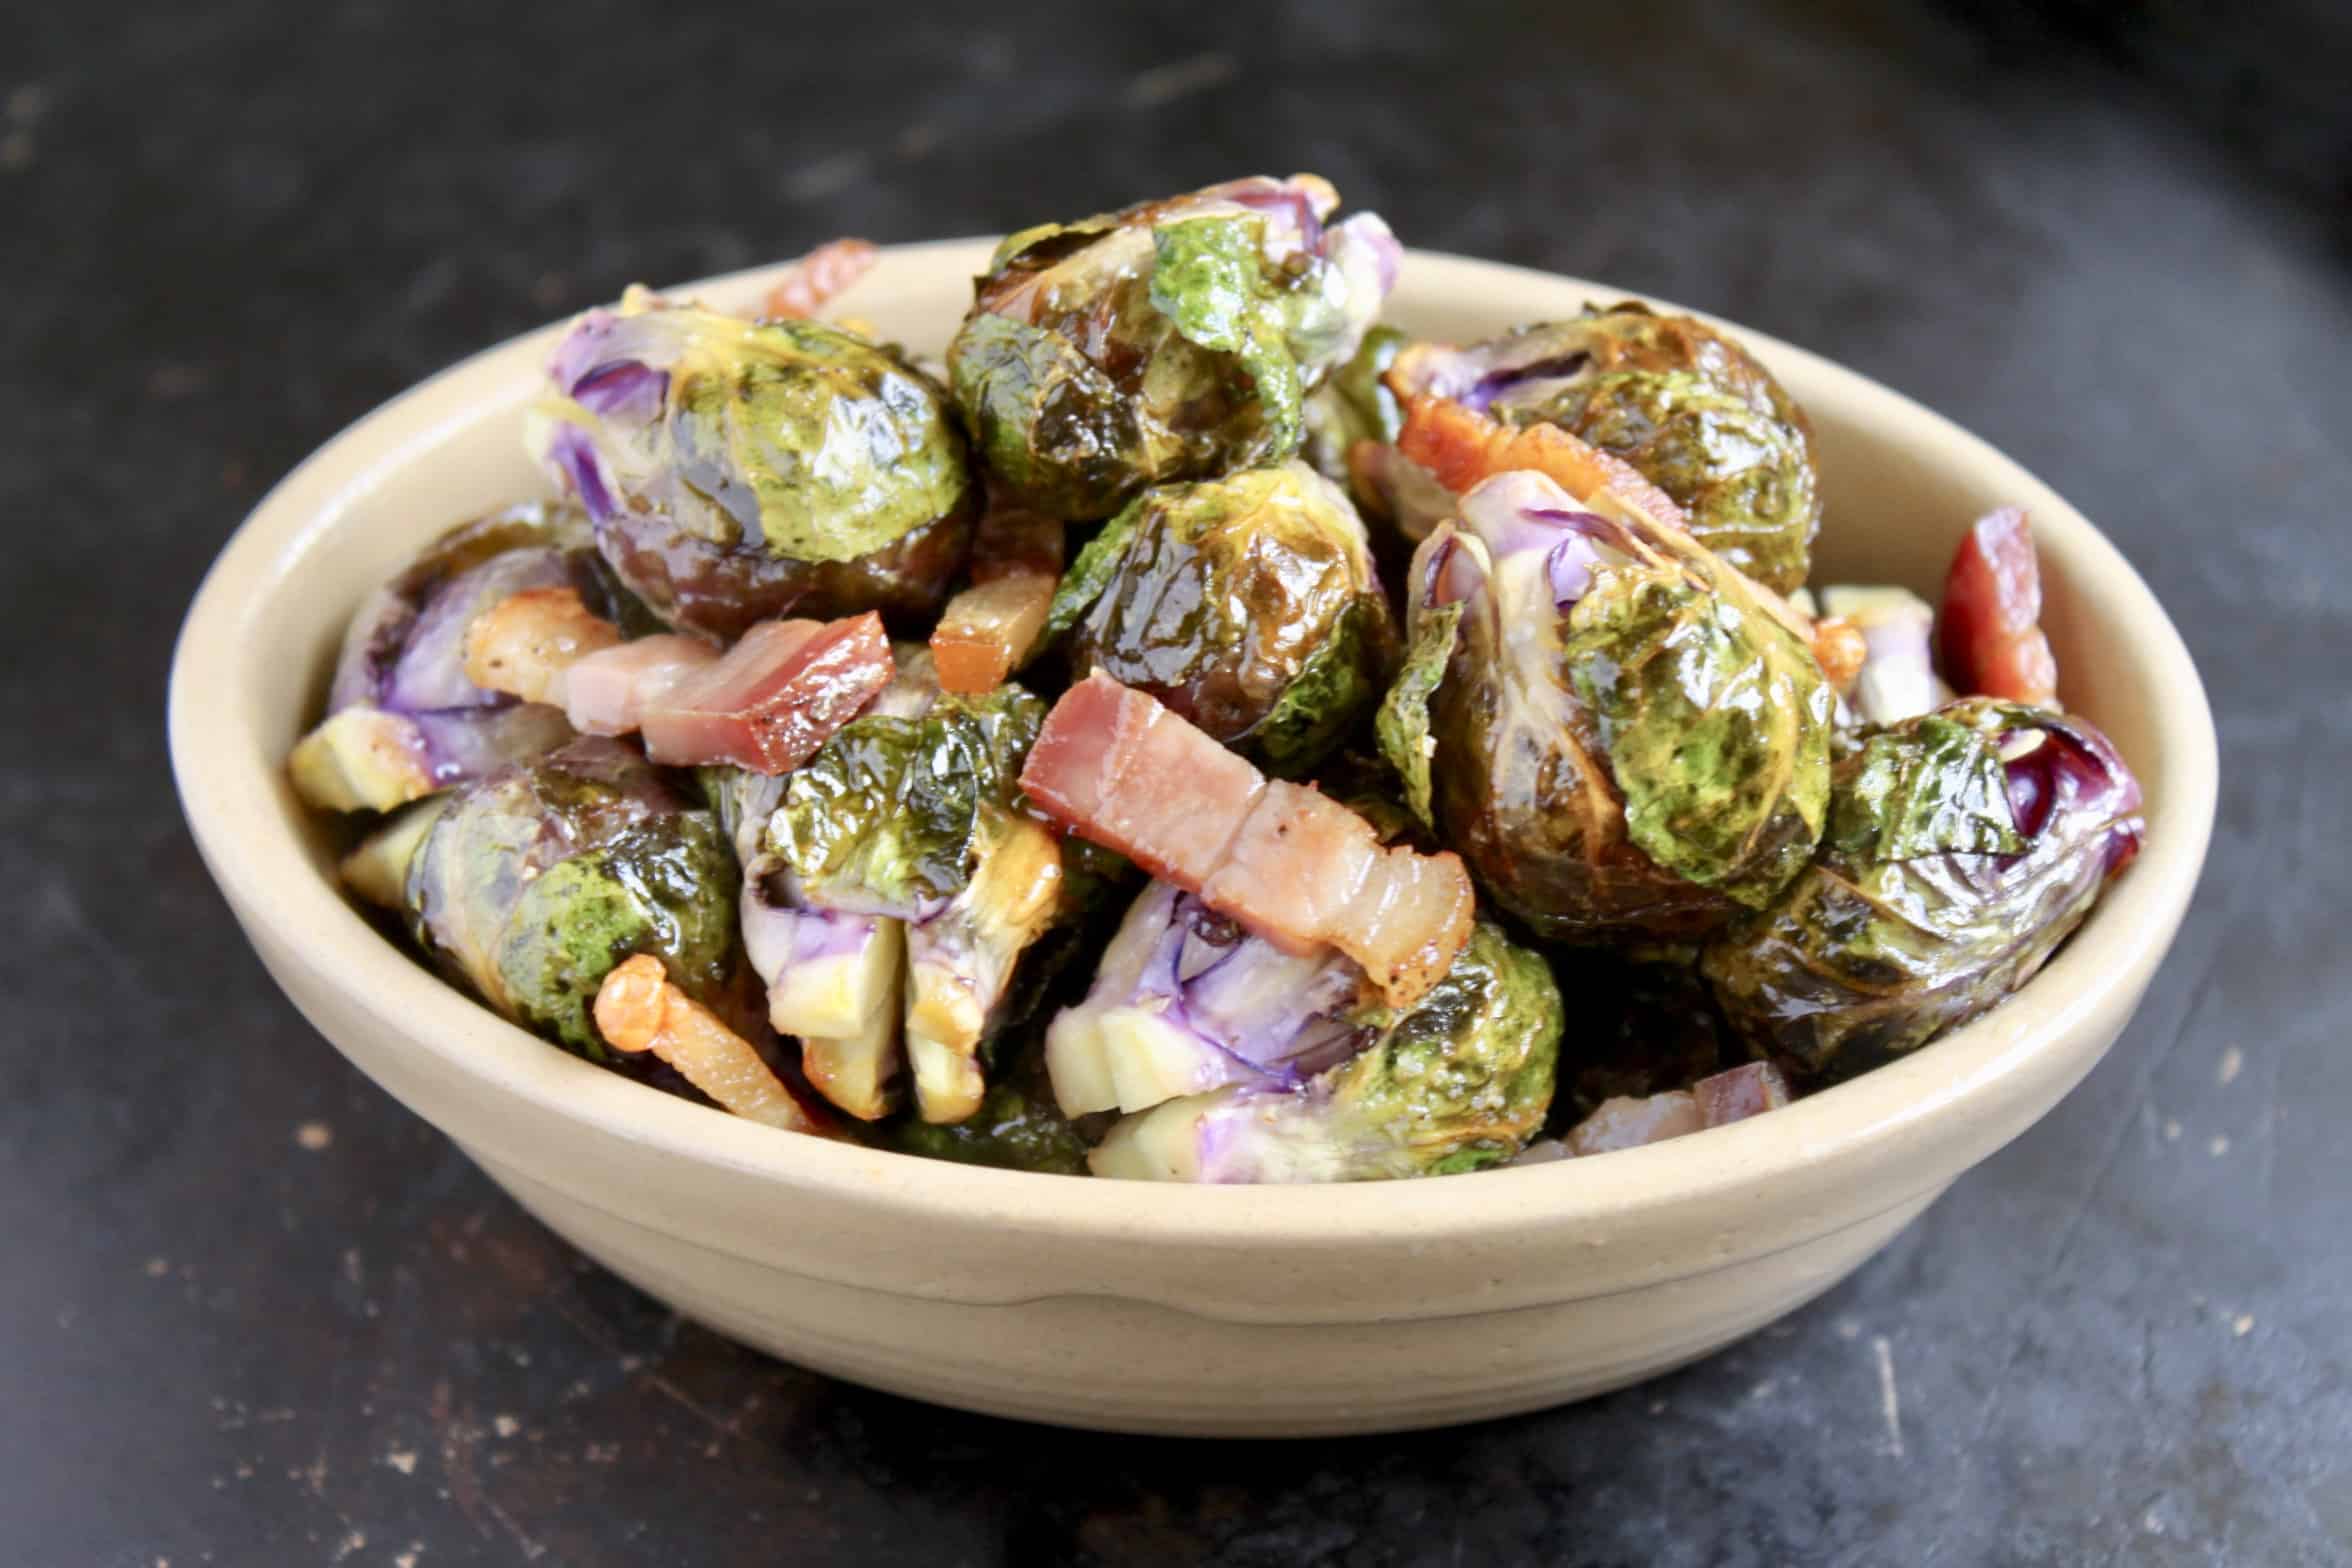 roasted brussels sprouts with pancetta in an oval dish